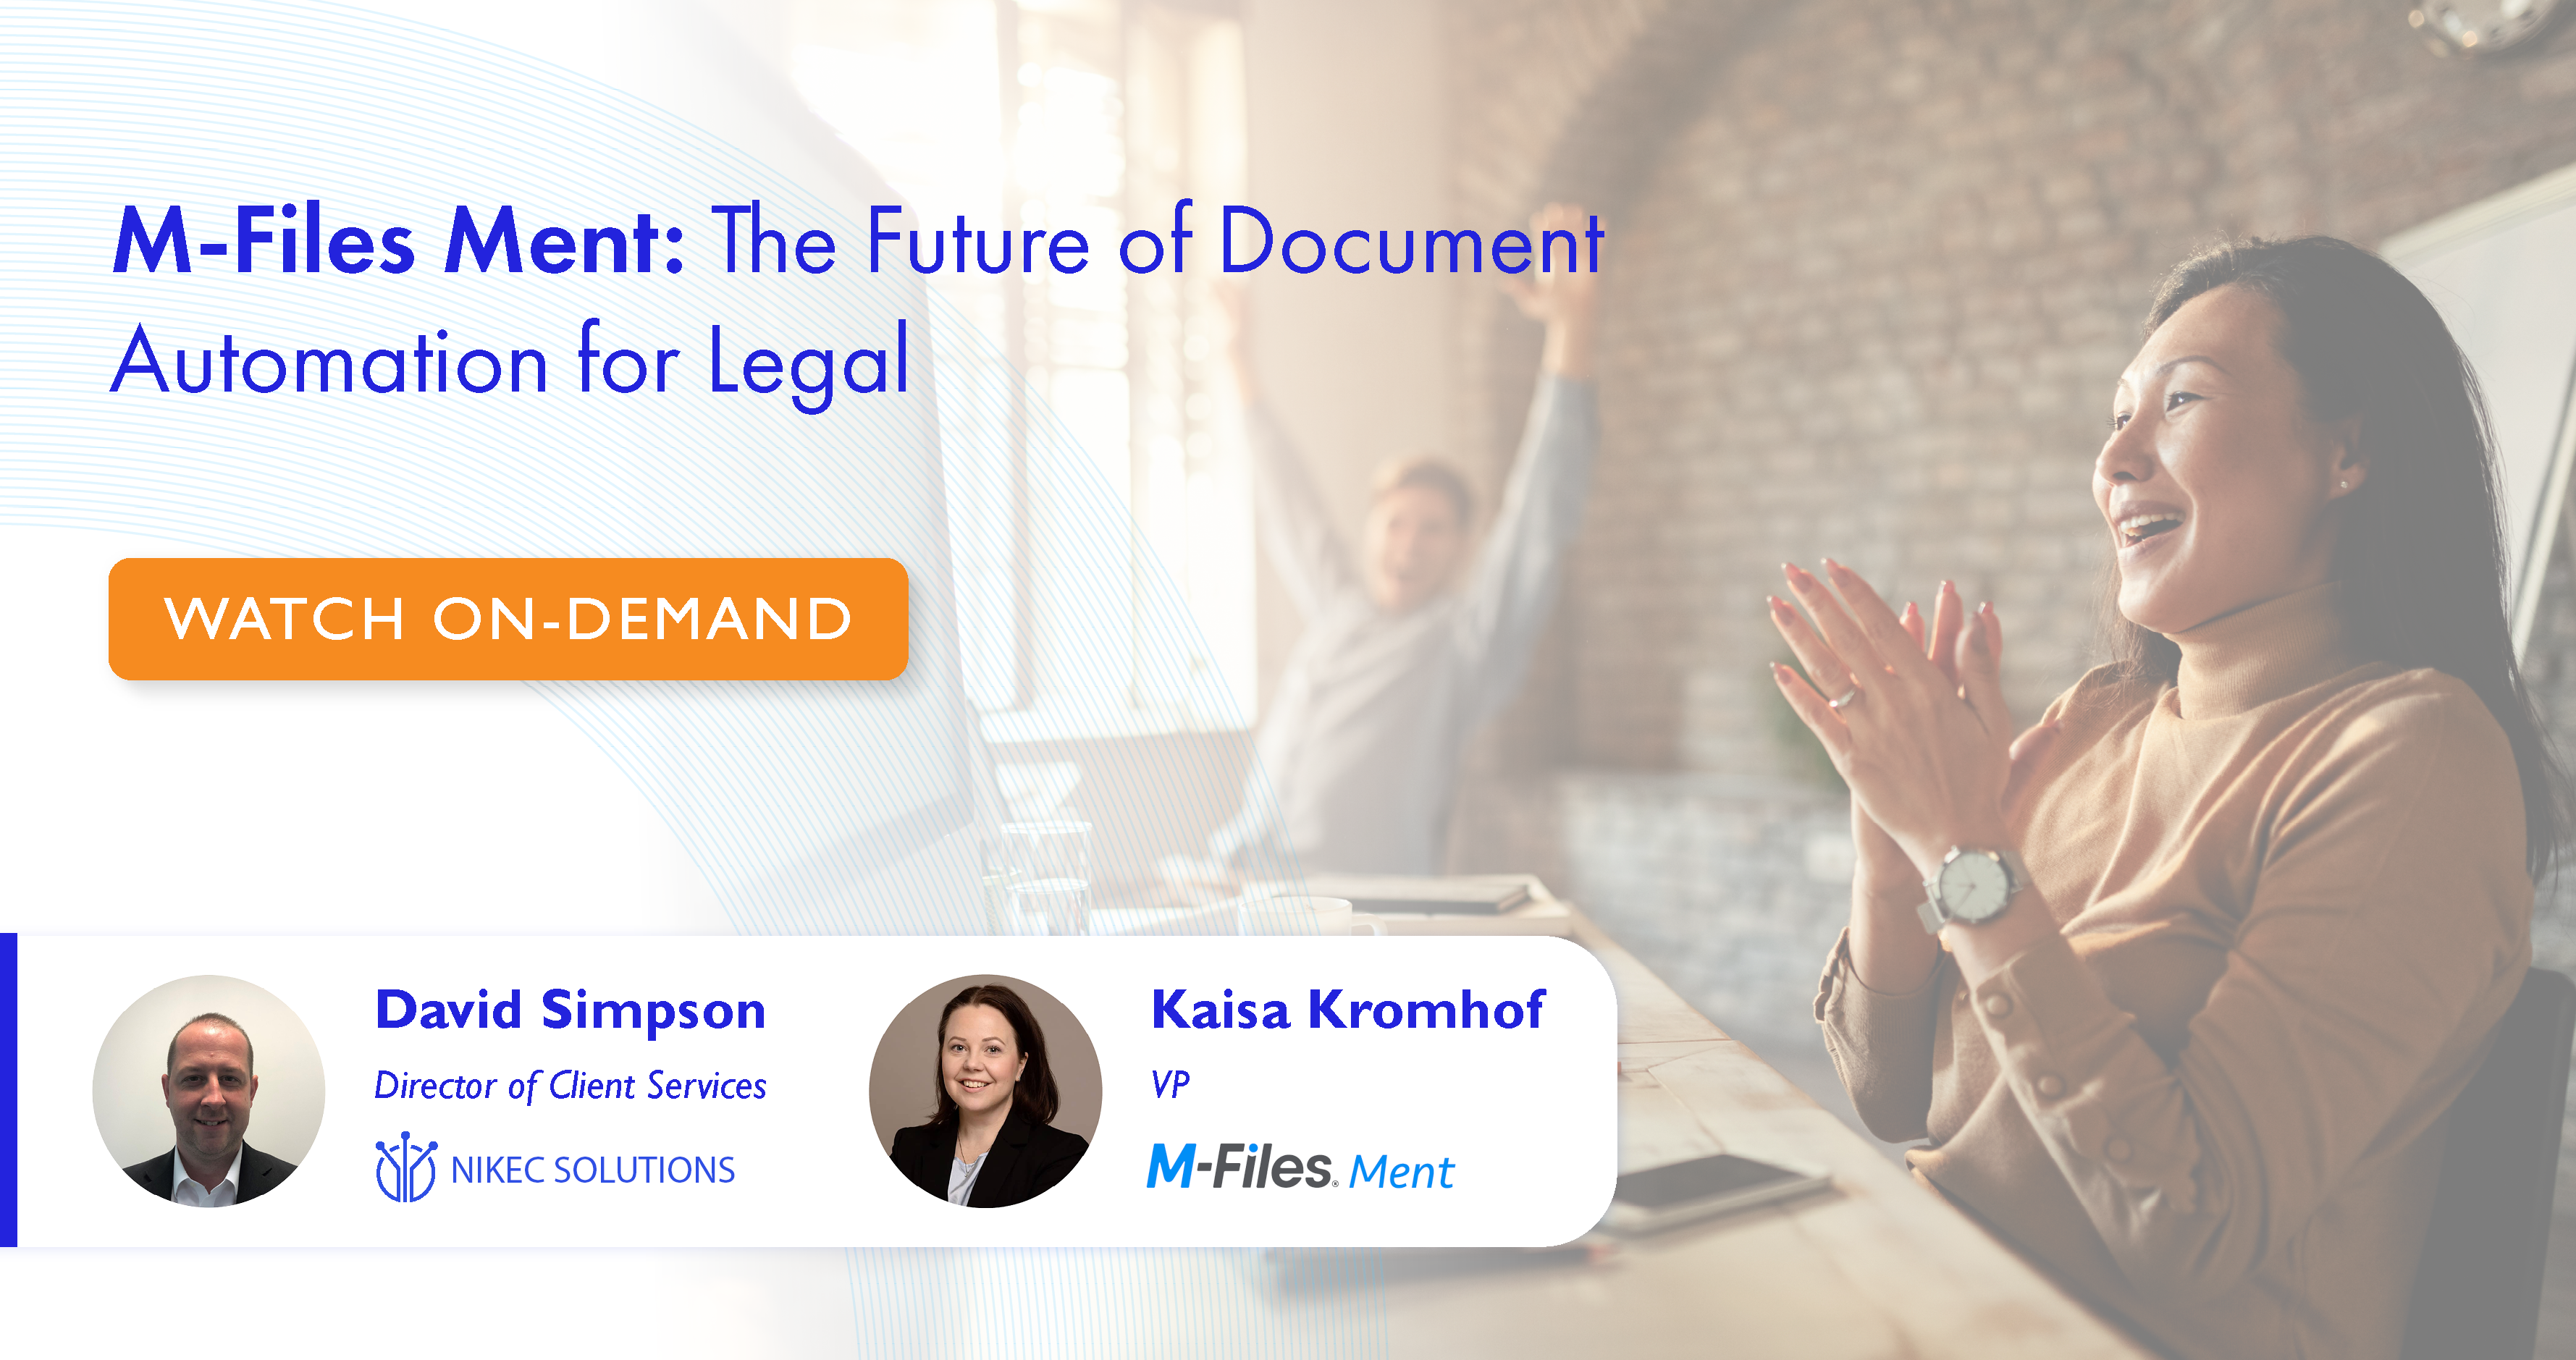 The future of document automation Ment helps seamlessly generate complex, data-⁠driven documents quickly and consistently